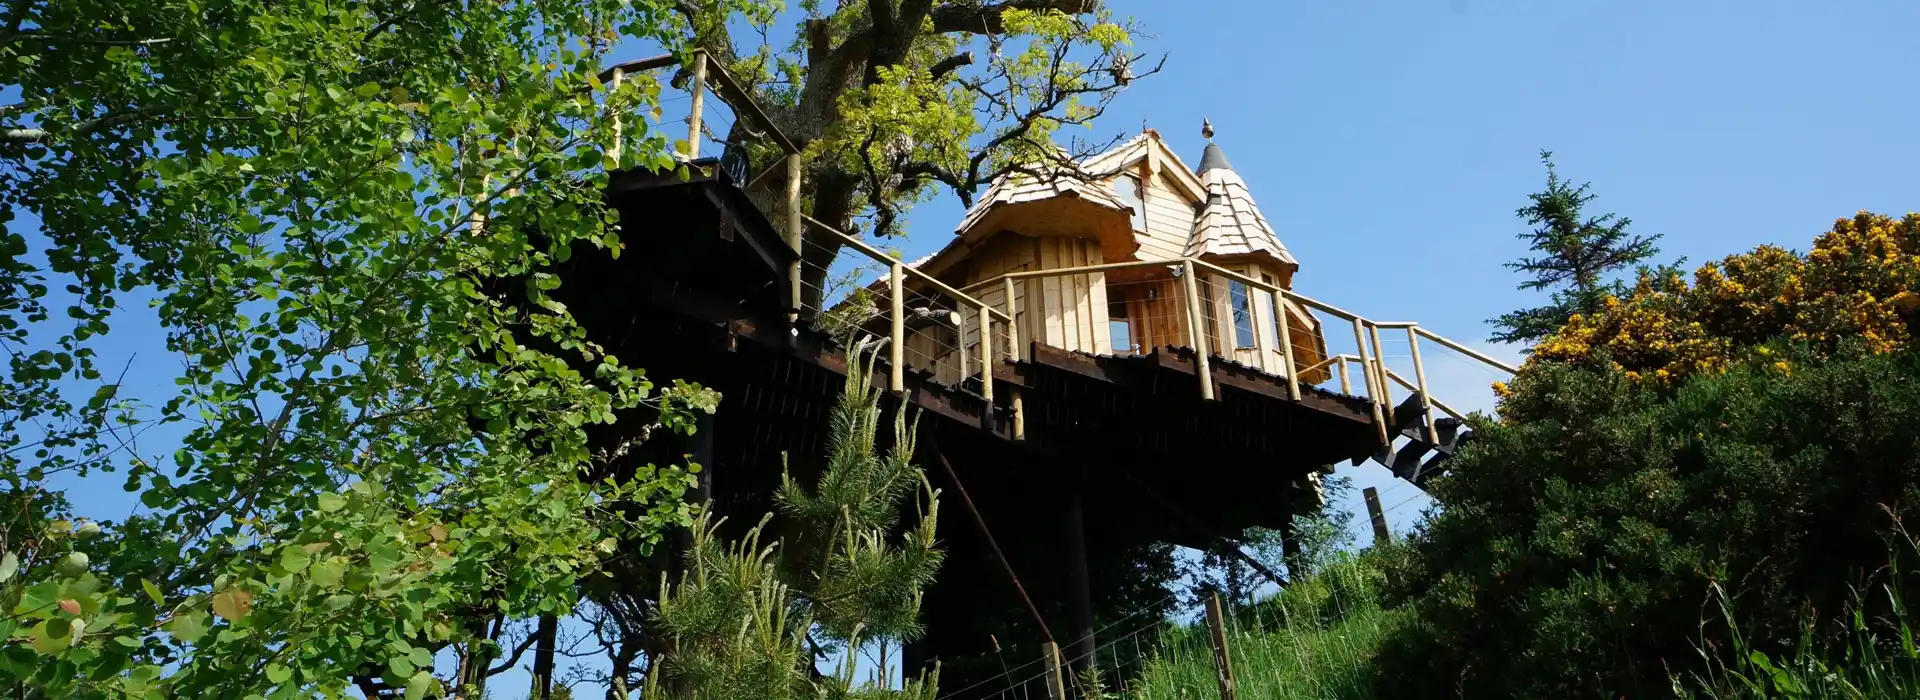 Treehouse holidays with hot tubs in Yorkshire